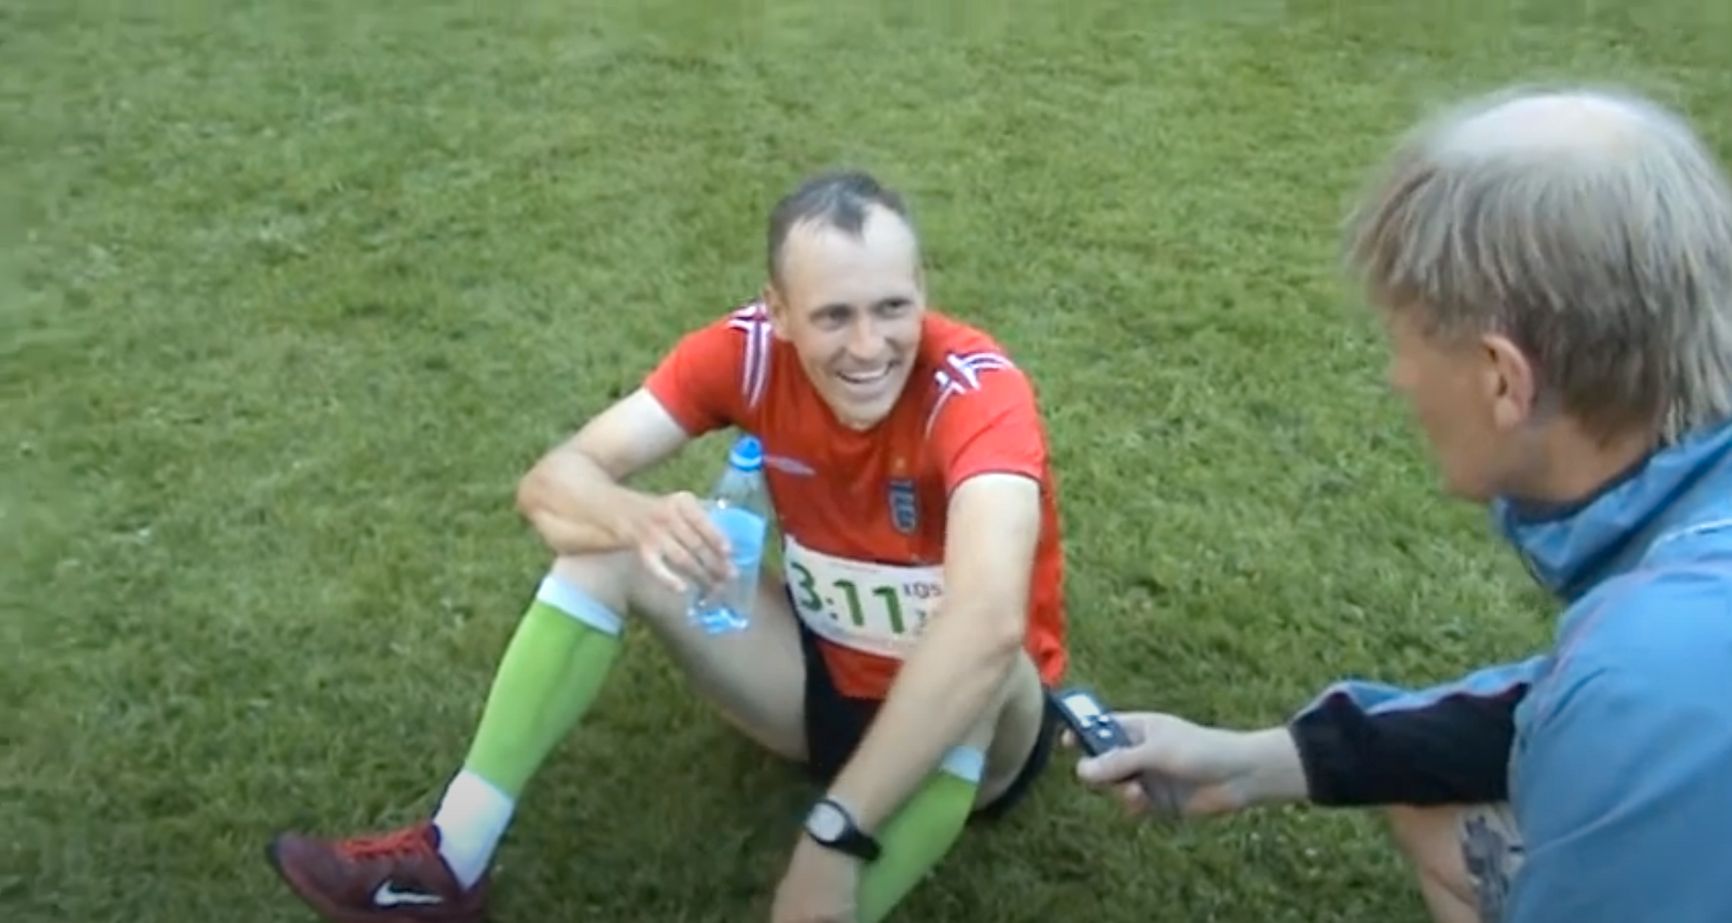 Toots giving a rare interview on camera after finishing second in a stadium marathon in 2015